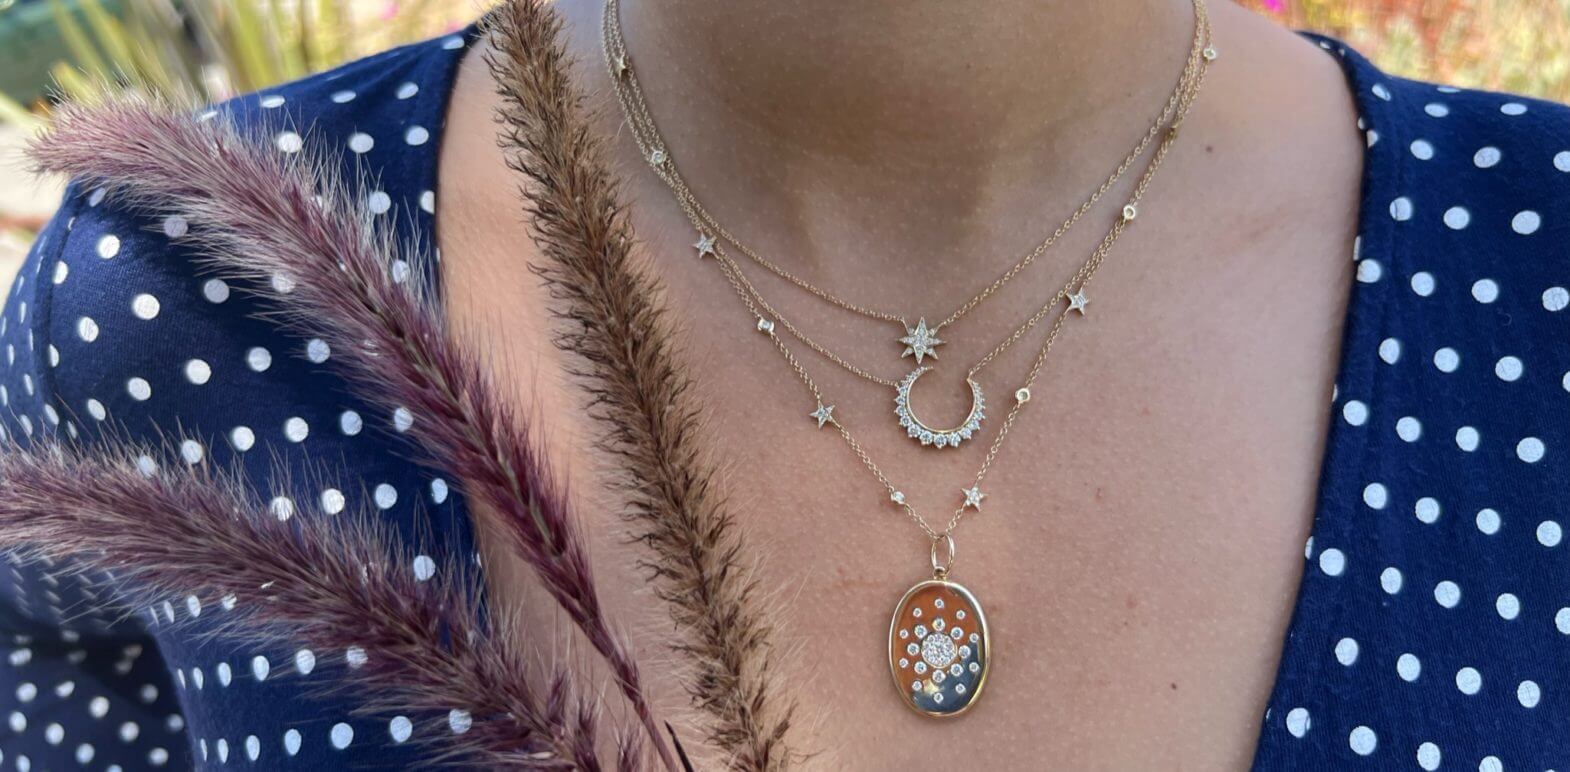 Fall Necklace Style at Moondance Jewelry Gallery